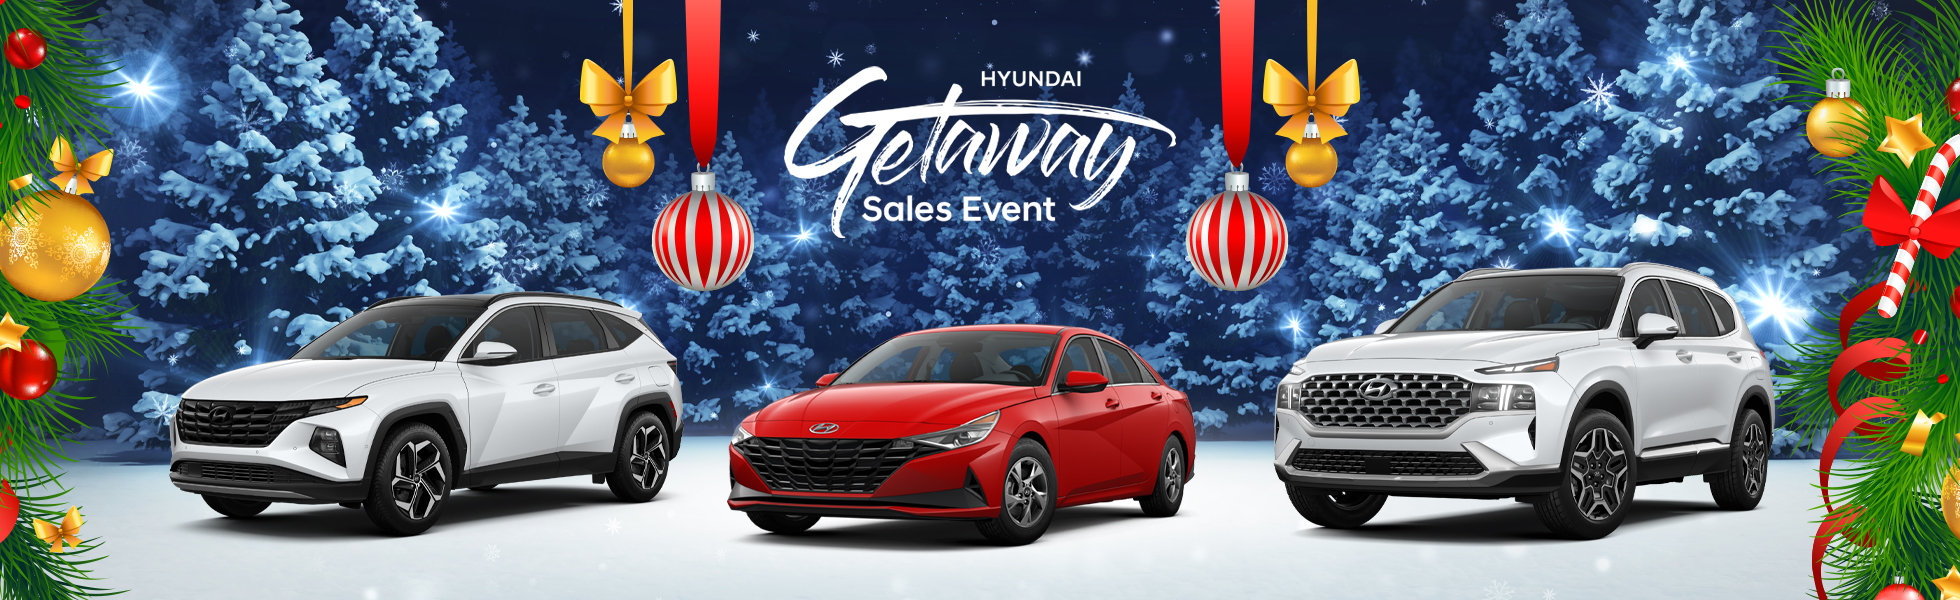 Hyundai Getaway Sales Event banner featuring Hyundai model lineup on display and winter holiday decorations